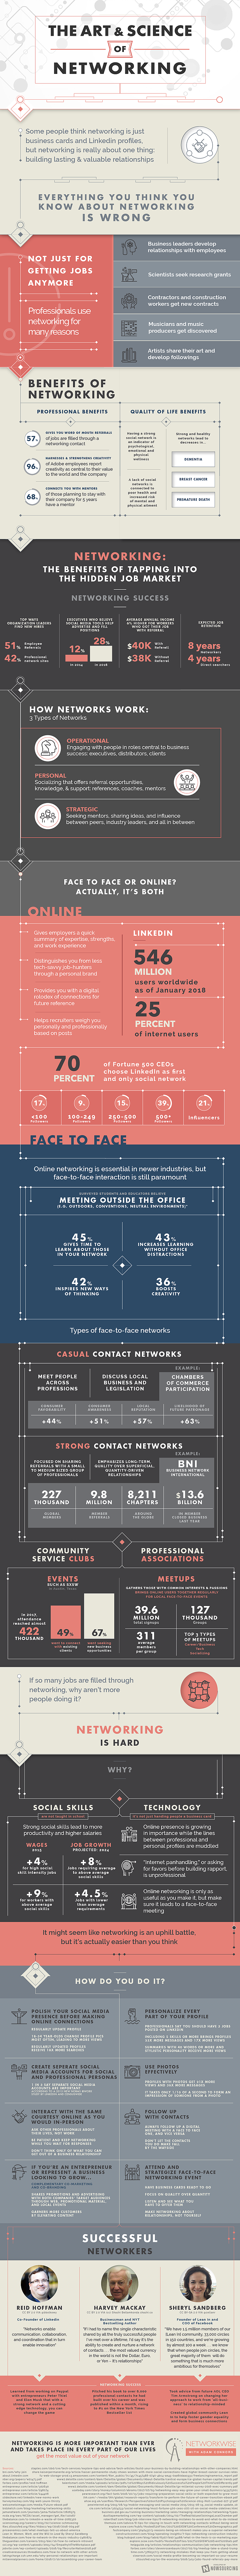 Networking Can Make Or Break Your Career [Infographic]